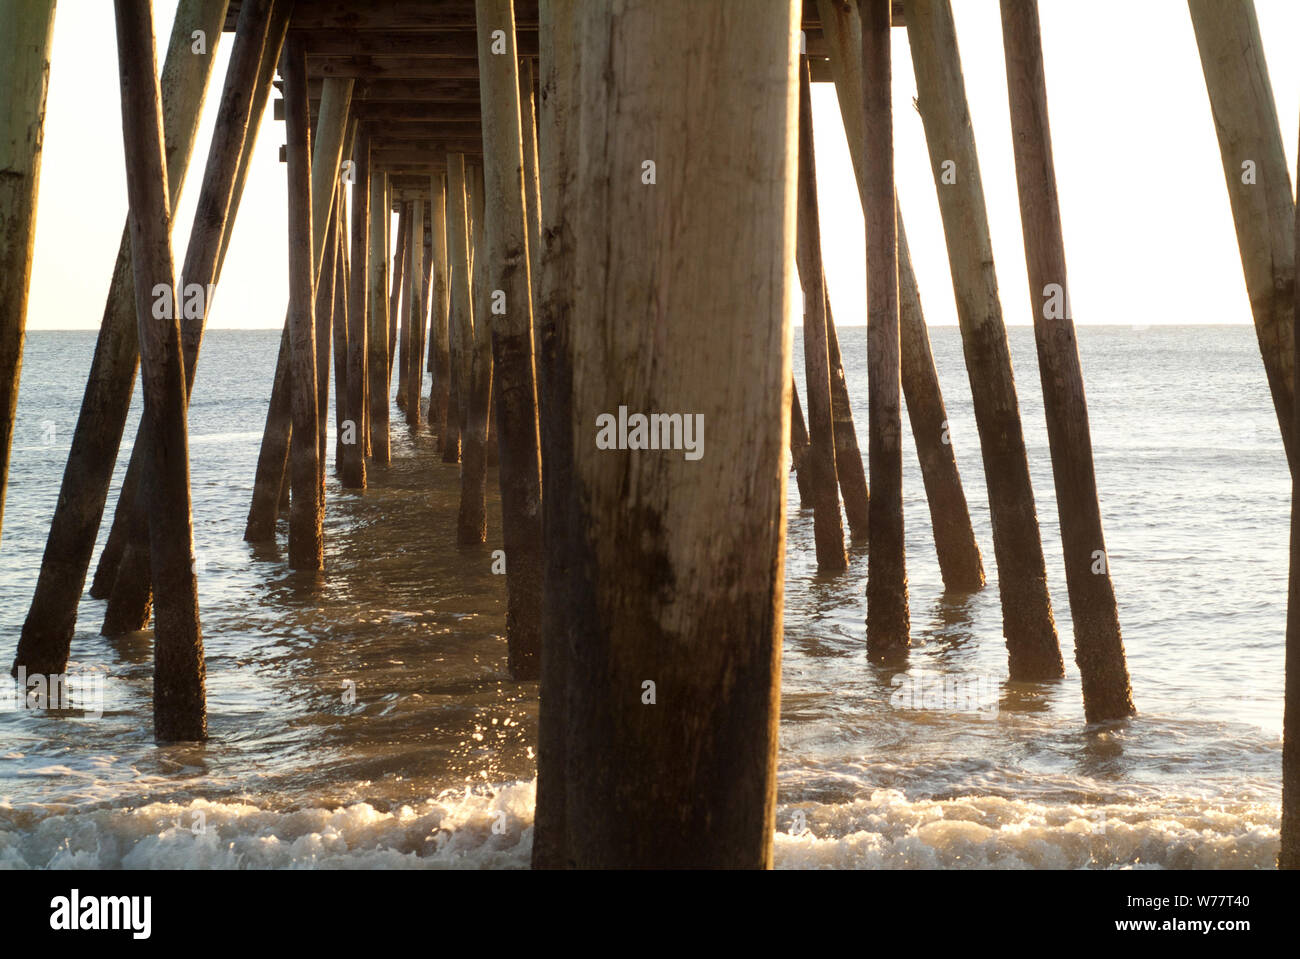 JETTY TO THE POINT: This all wooden construct stretches far out into the Atlantic ocean of Virginia beach. Stock Photo